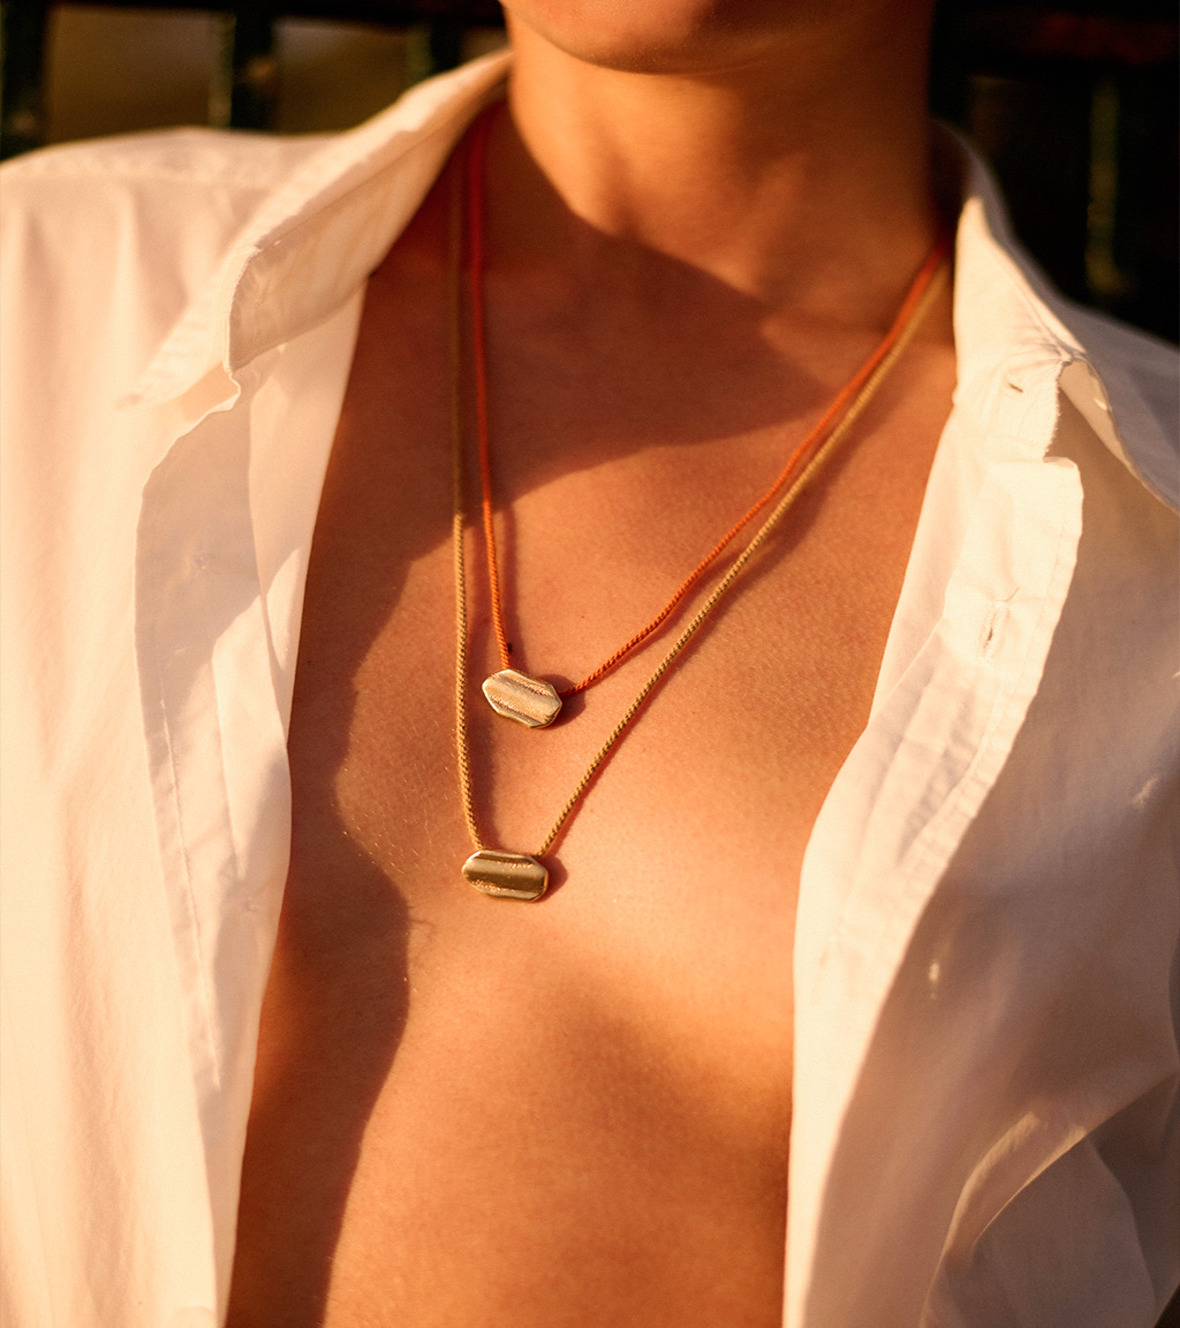 Sand Long Cord Necklace IMMP23YS By Yannis Sergakis